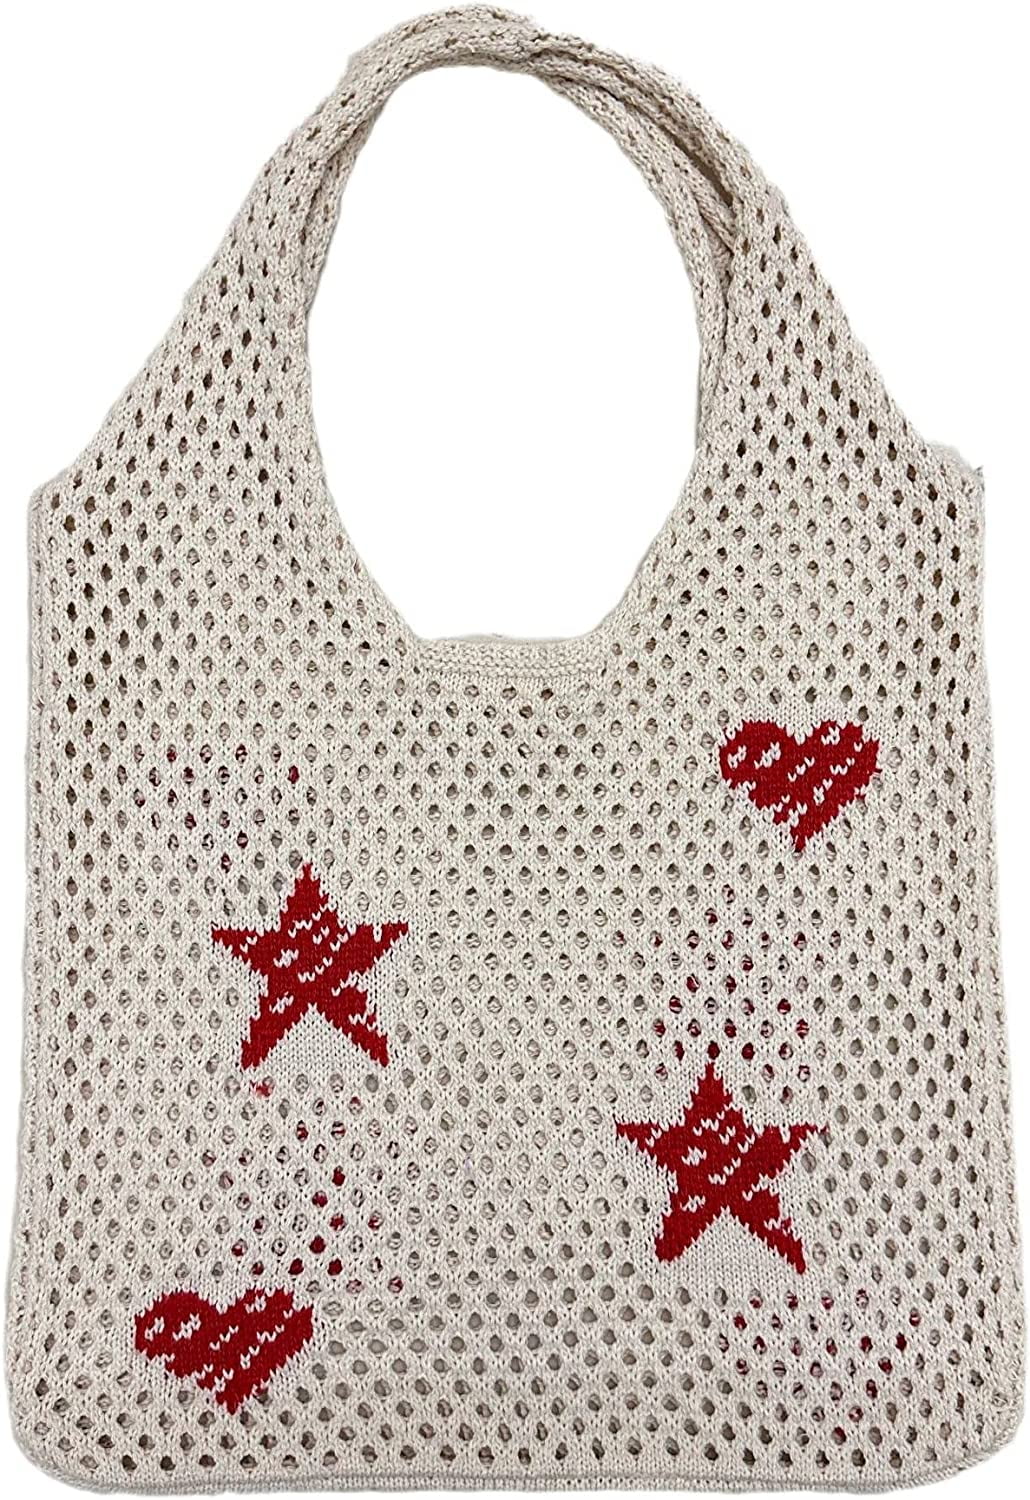 Danceemangoos Grunge Tote Bag Y2K Ripped Knit Hobo Bags Downtown Girl Hippie Heart Crochet Purse Aesthetic Fairycore Accessories, Kids Unisex, Size: 